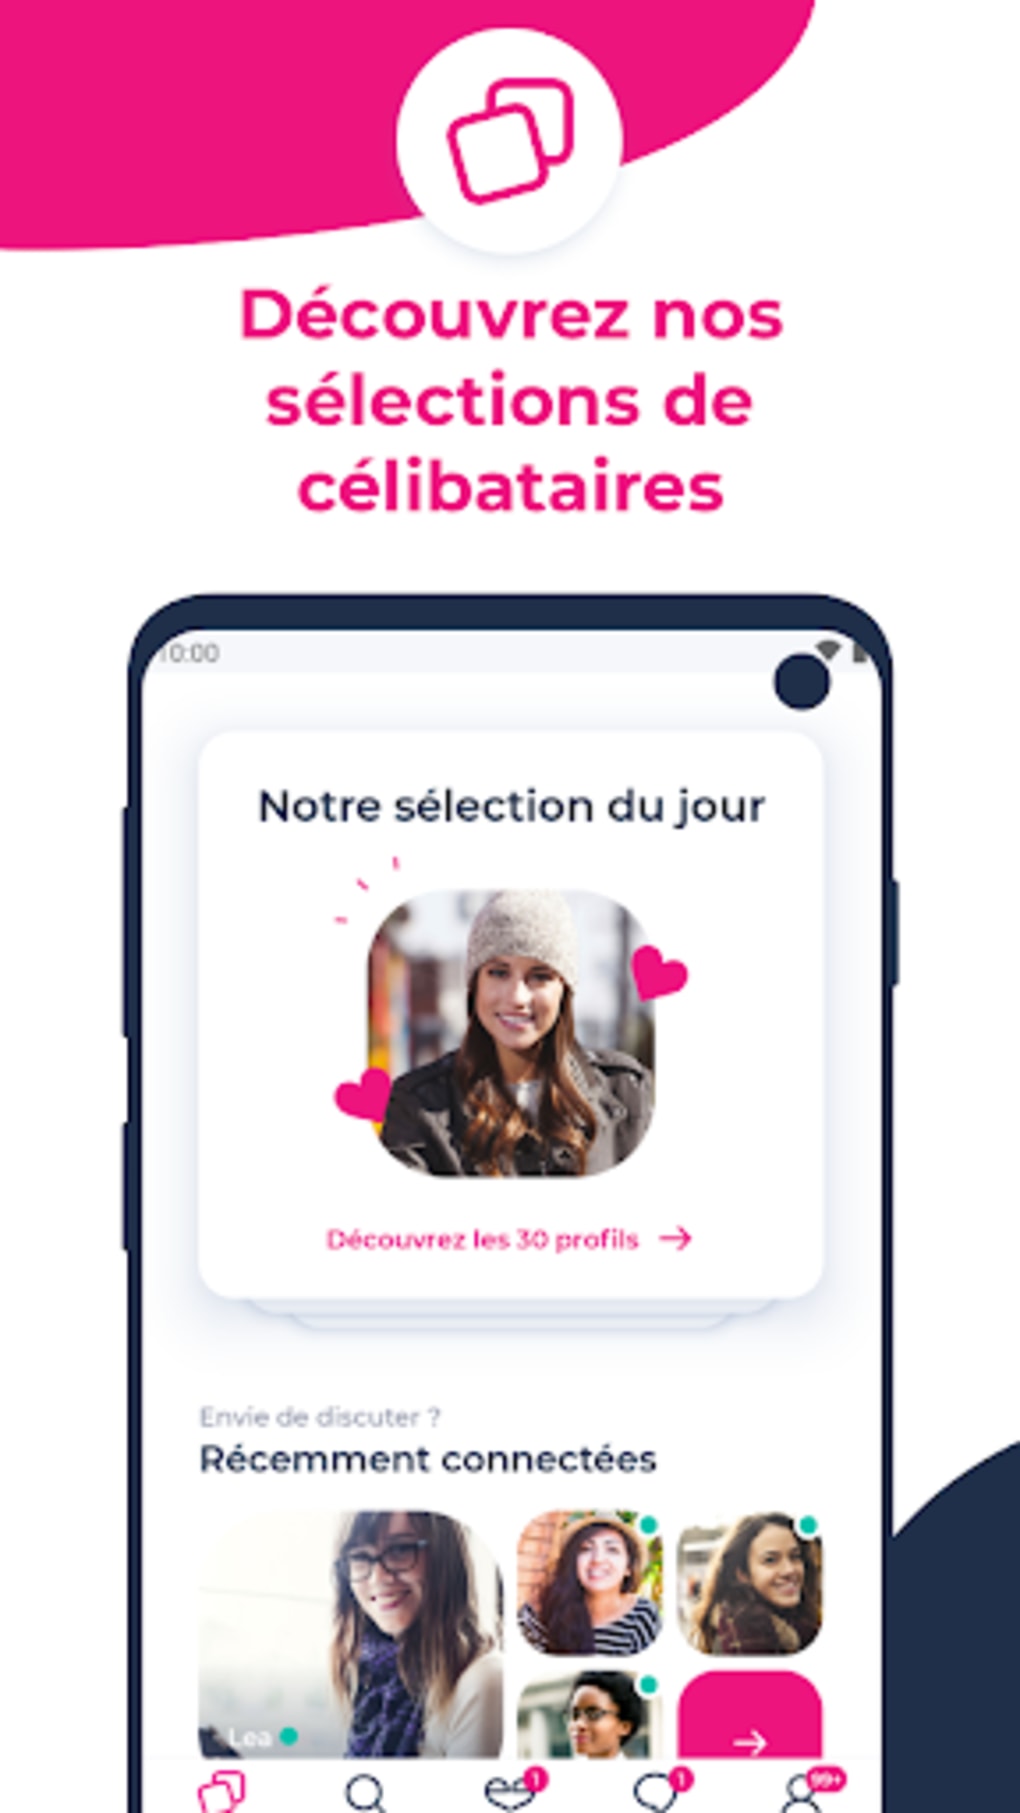 Does Meetic have an app?